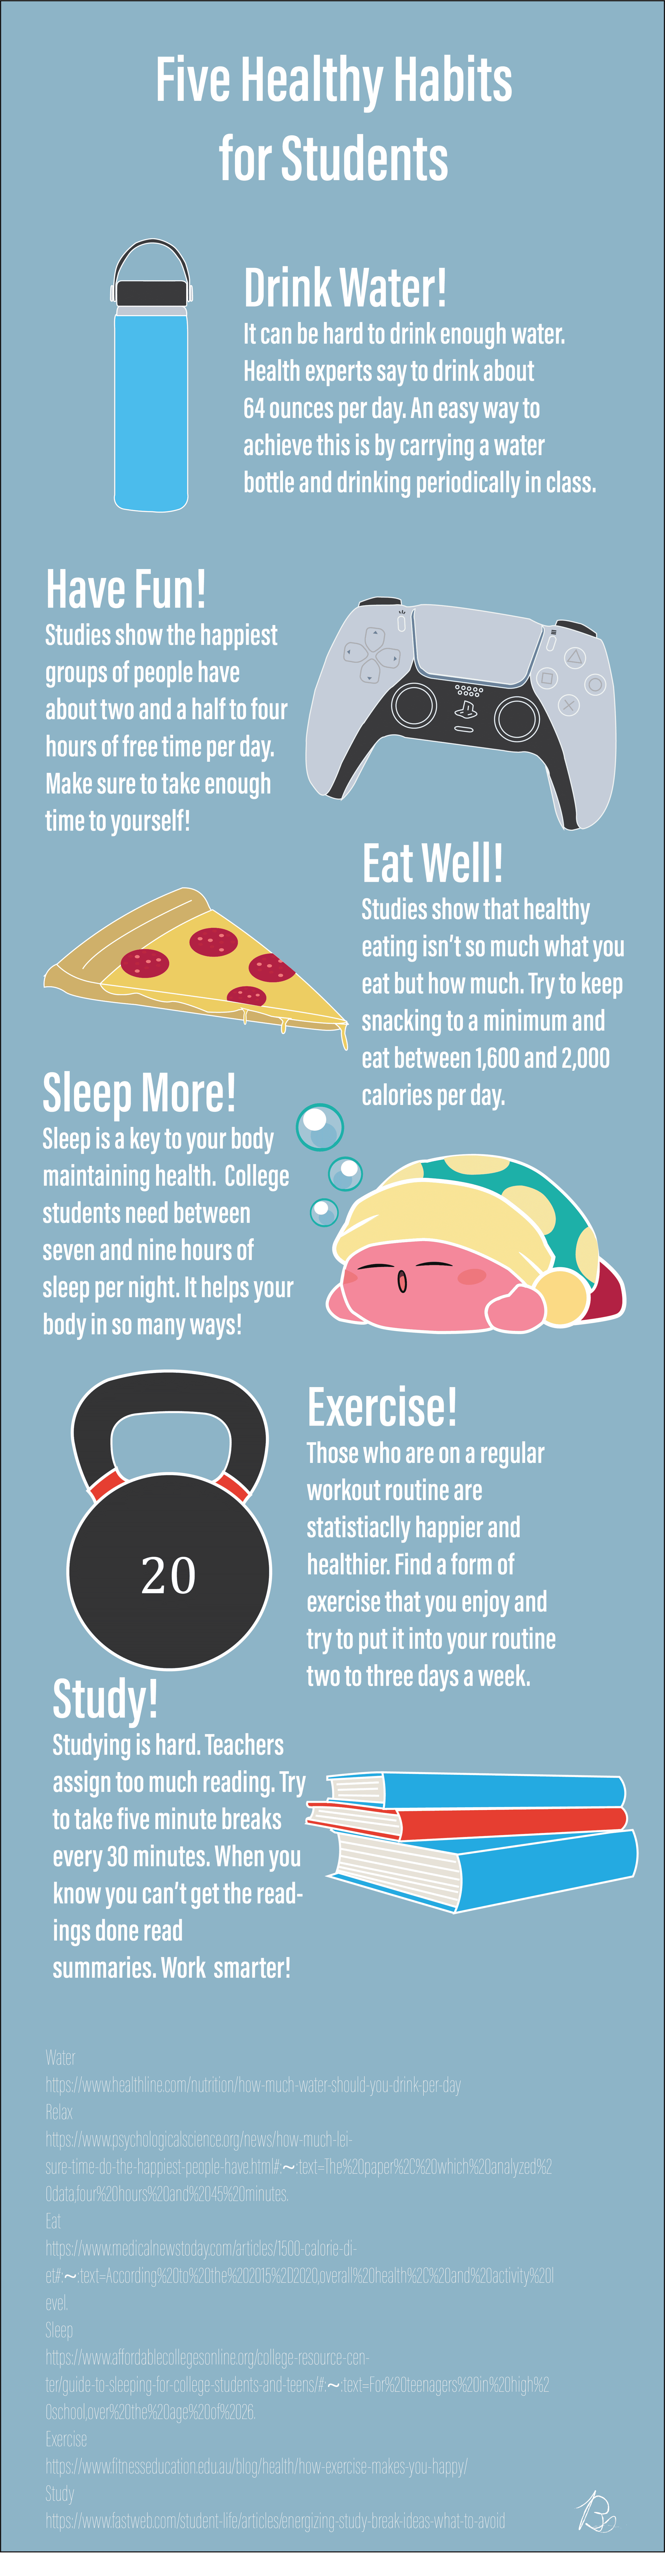 Healthy habits lead to a healthy college experience.